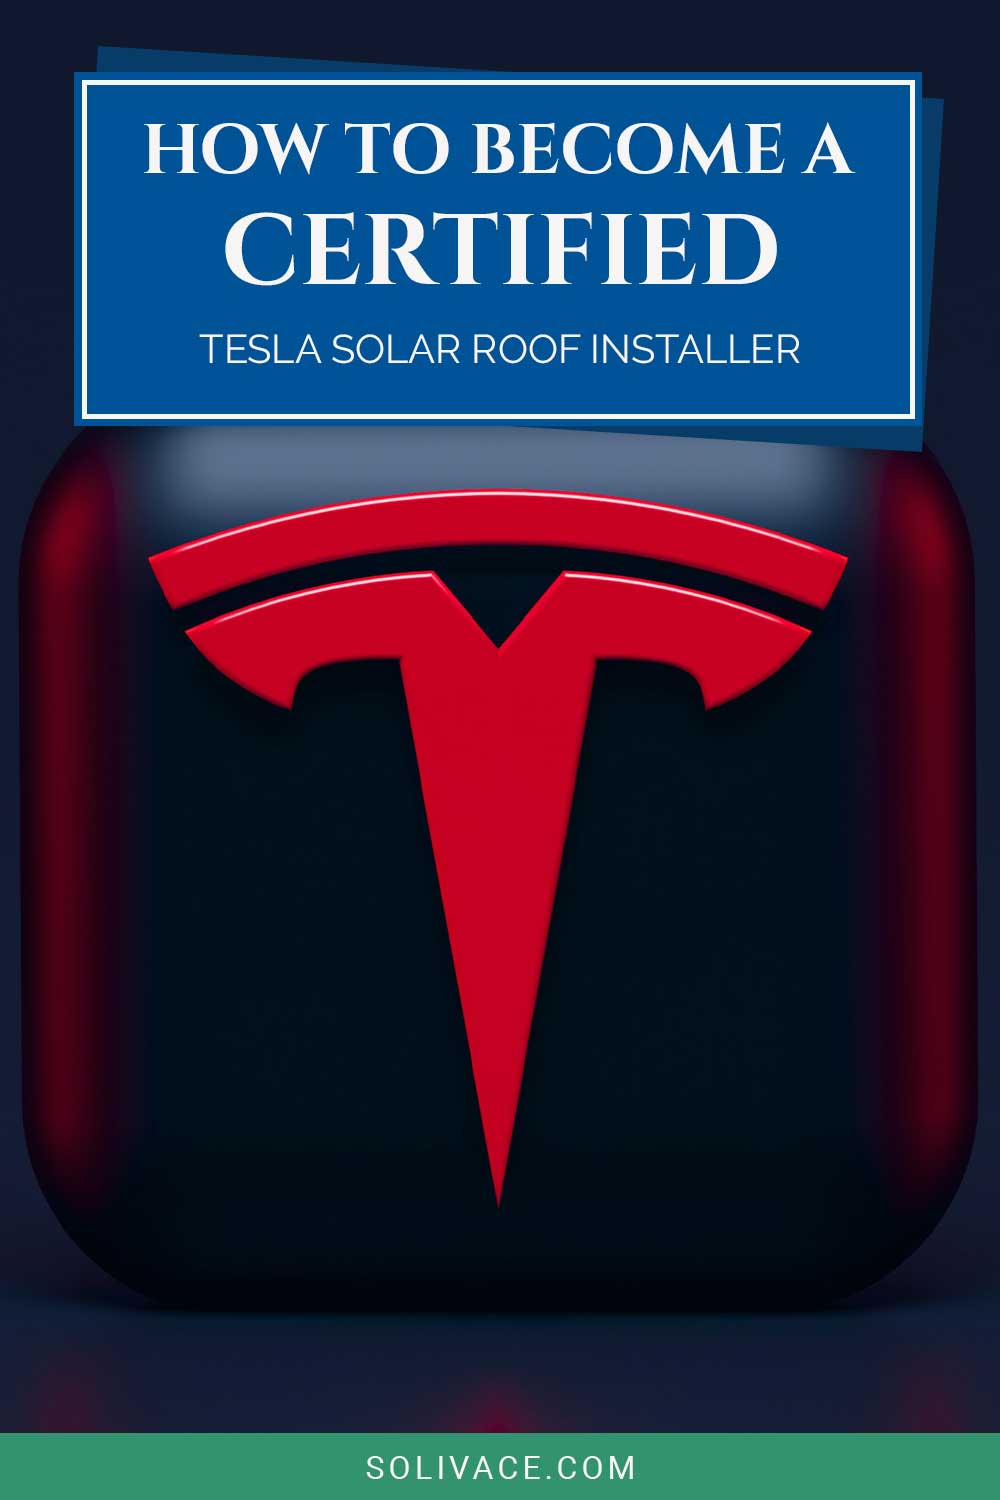 How To Become A Certified Tesla Solar Roof Installer